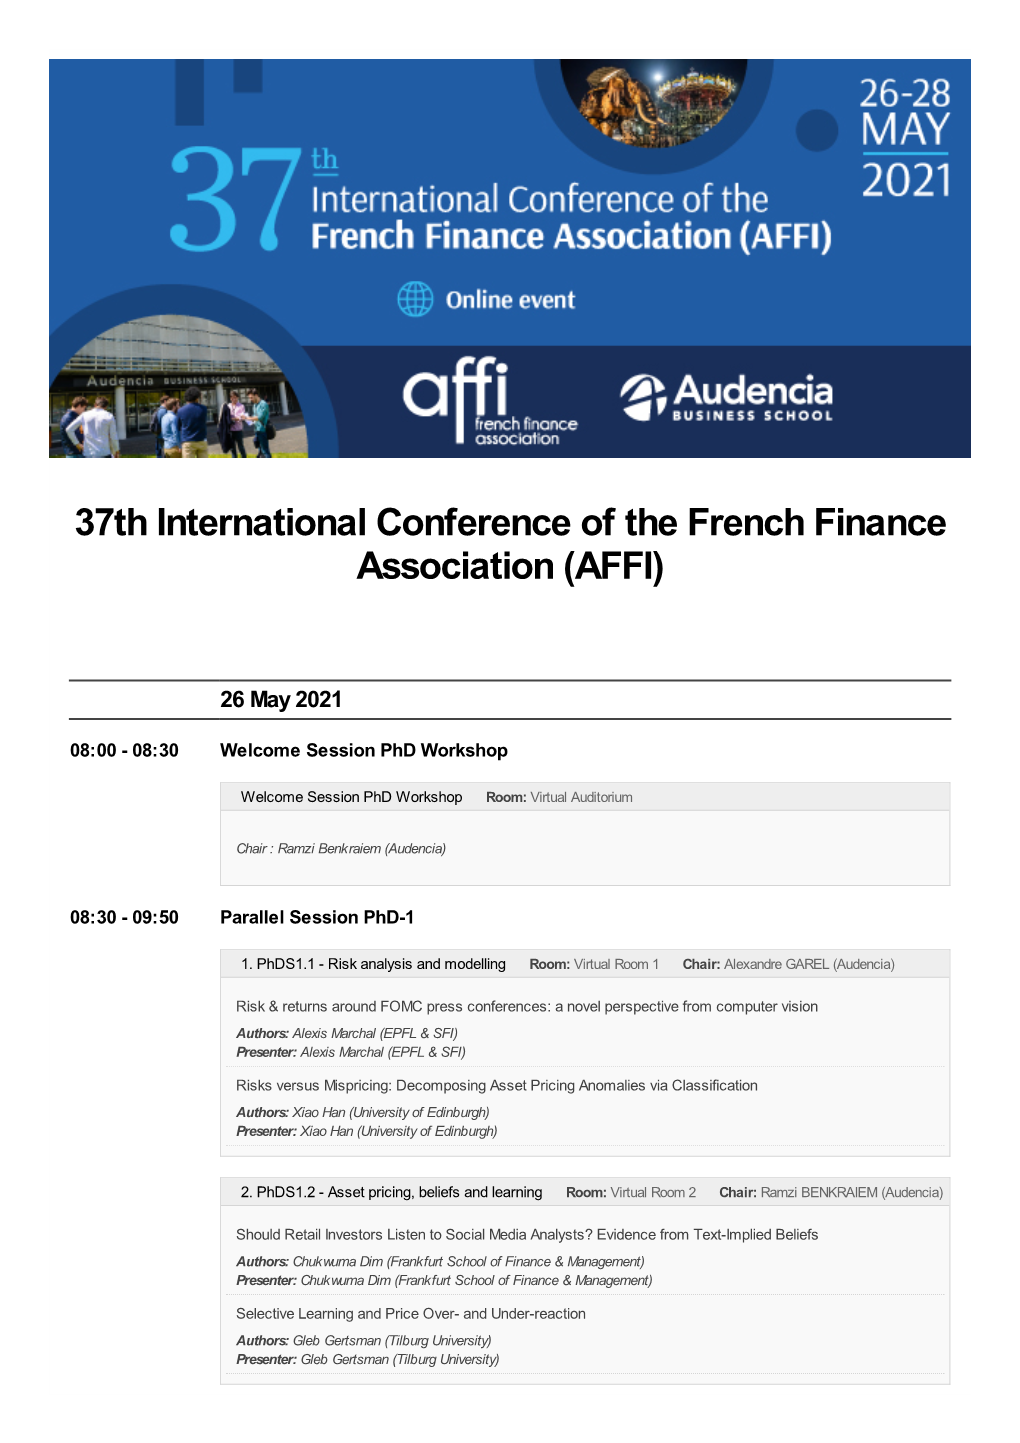 37Th International Conference of the French Finance Association (AFFI)